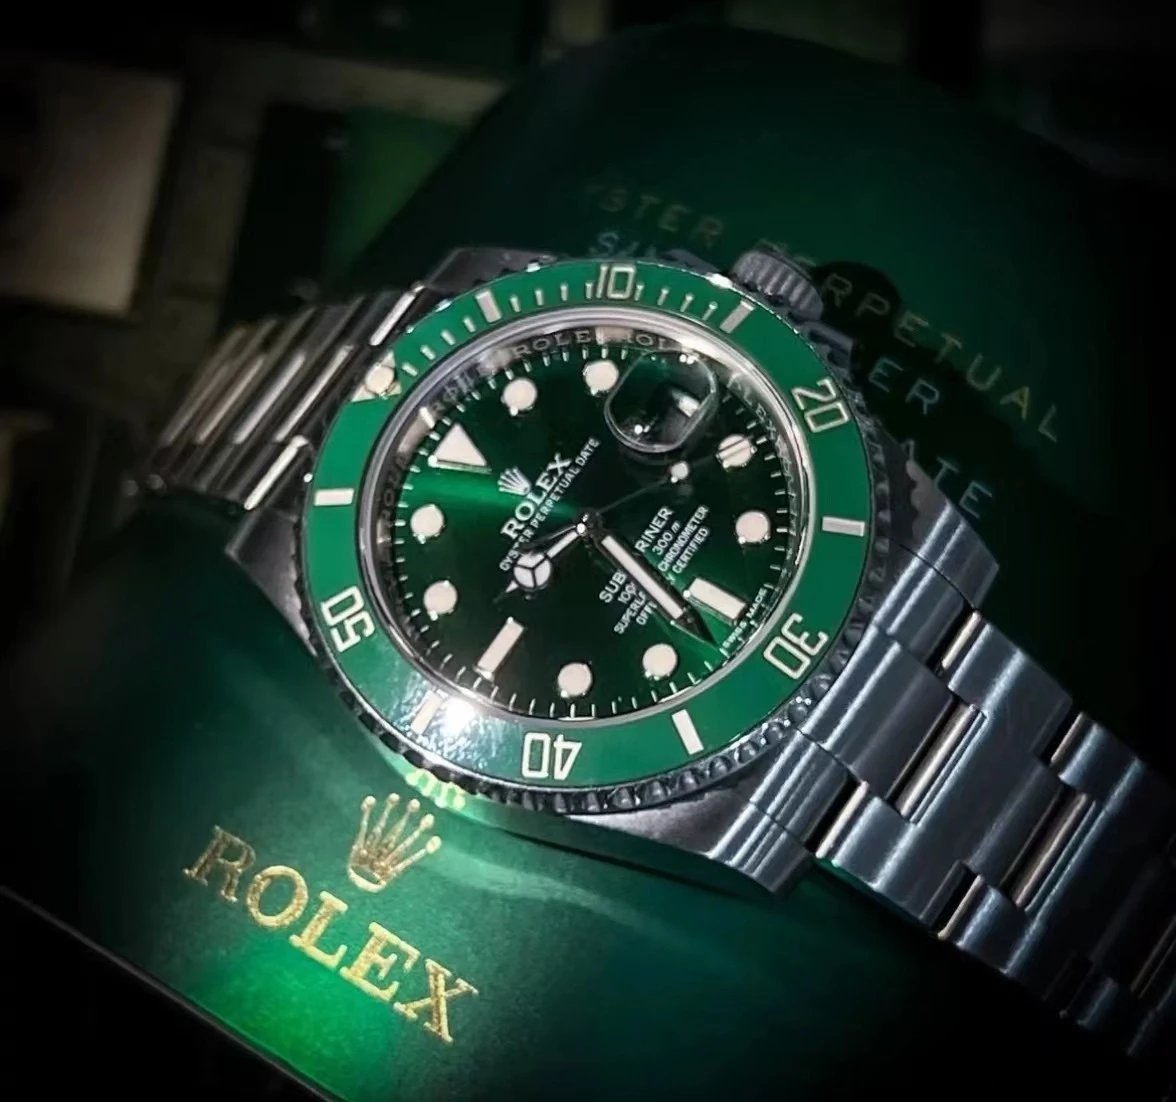 Rolex 1:1 Super Clone Submariner 3135 Clean Factory 116610 LV Green photo review